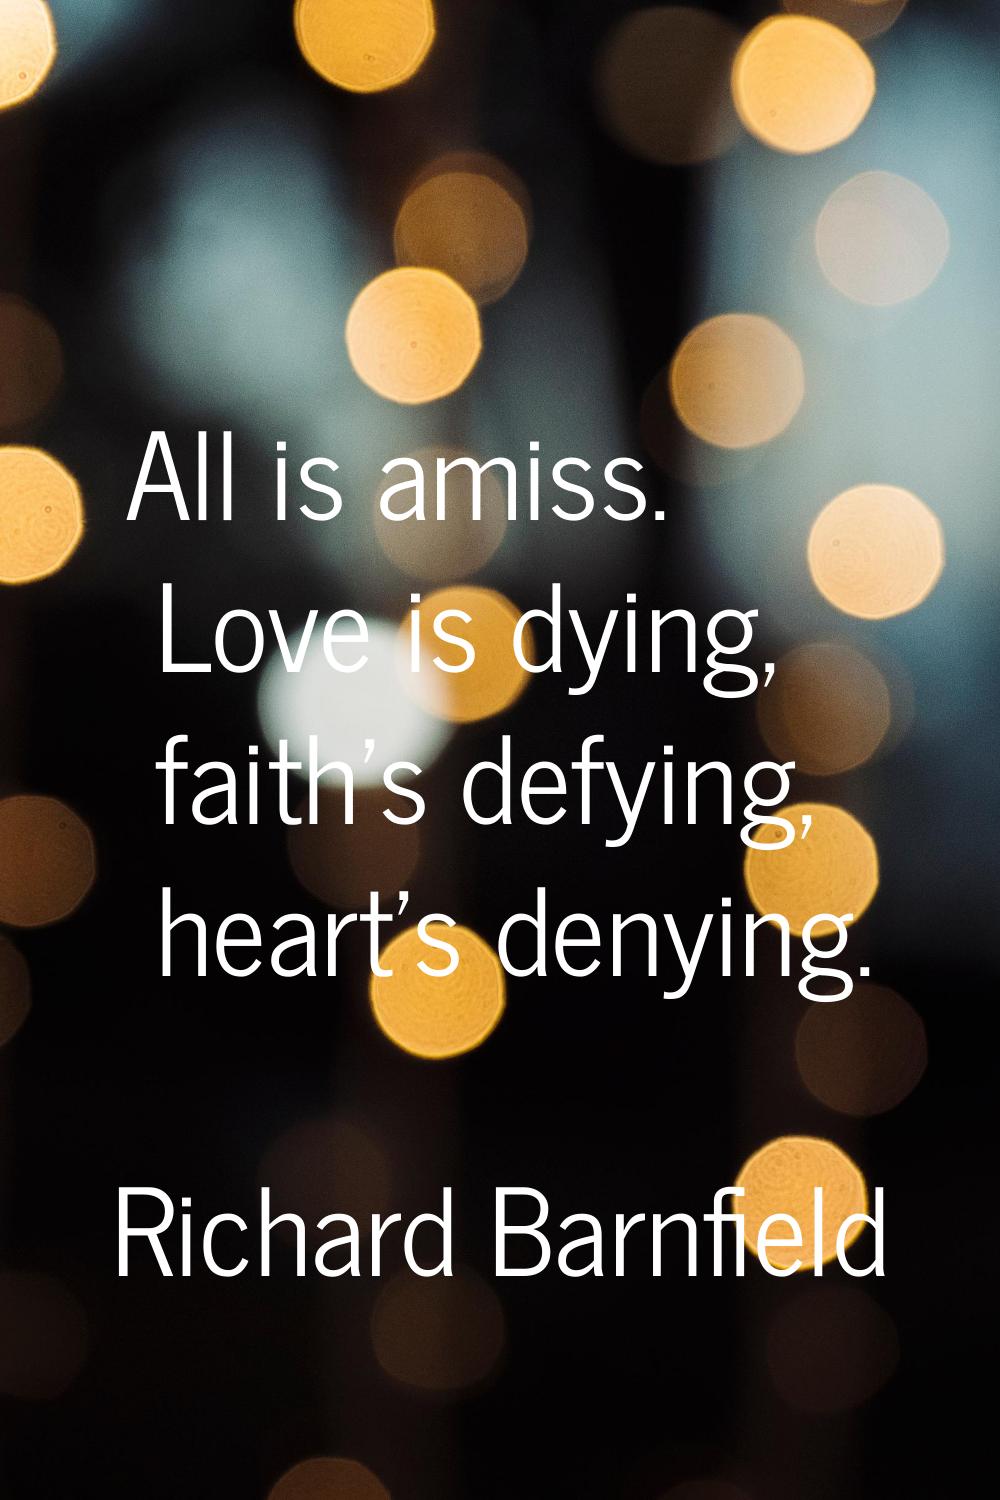 All is amiss. Love is dying, faith's defying, heart's denying.